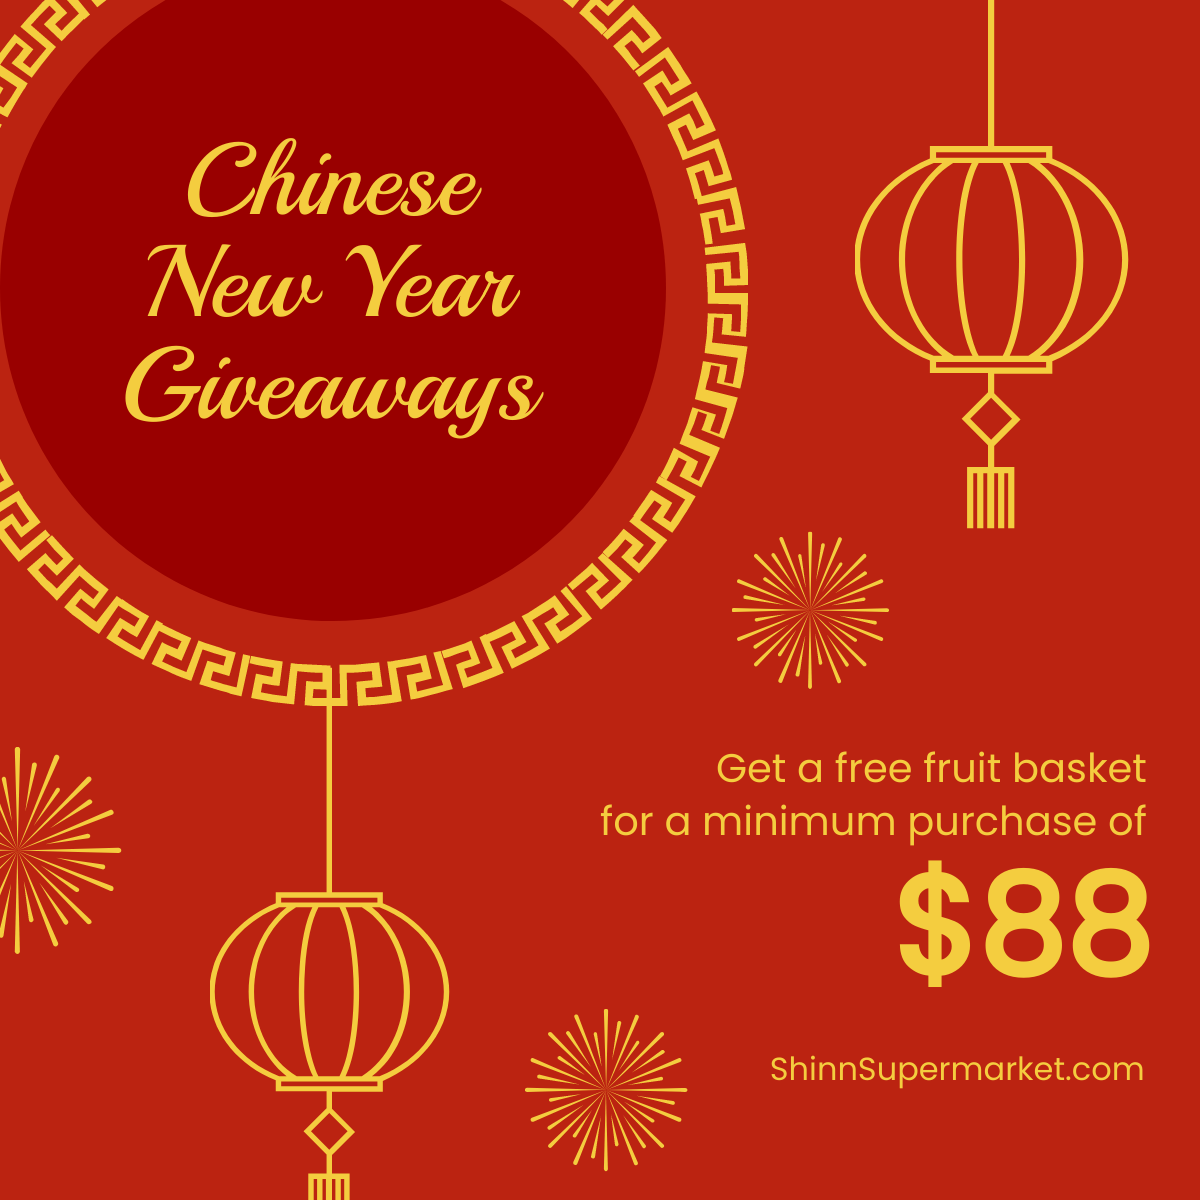 Chinese New Year Giveaway Linkedin Post Template